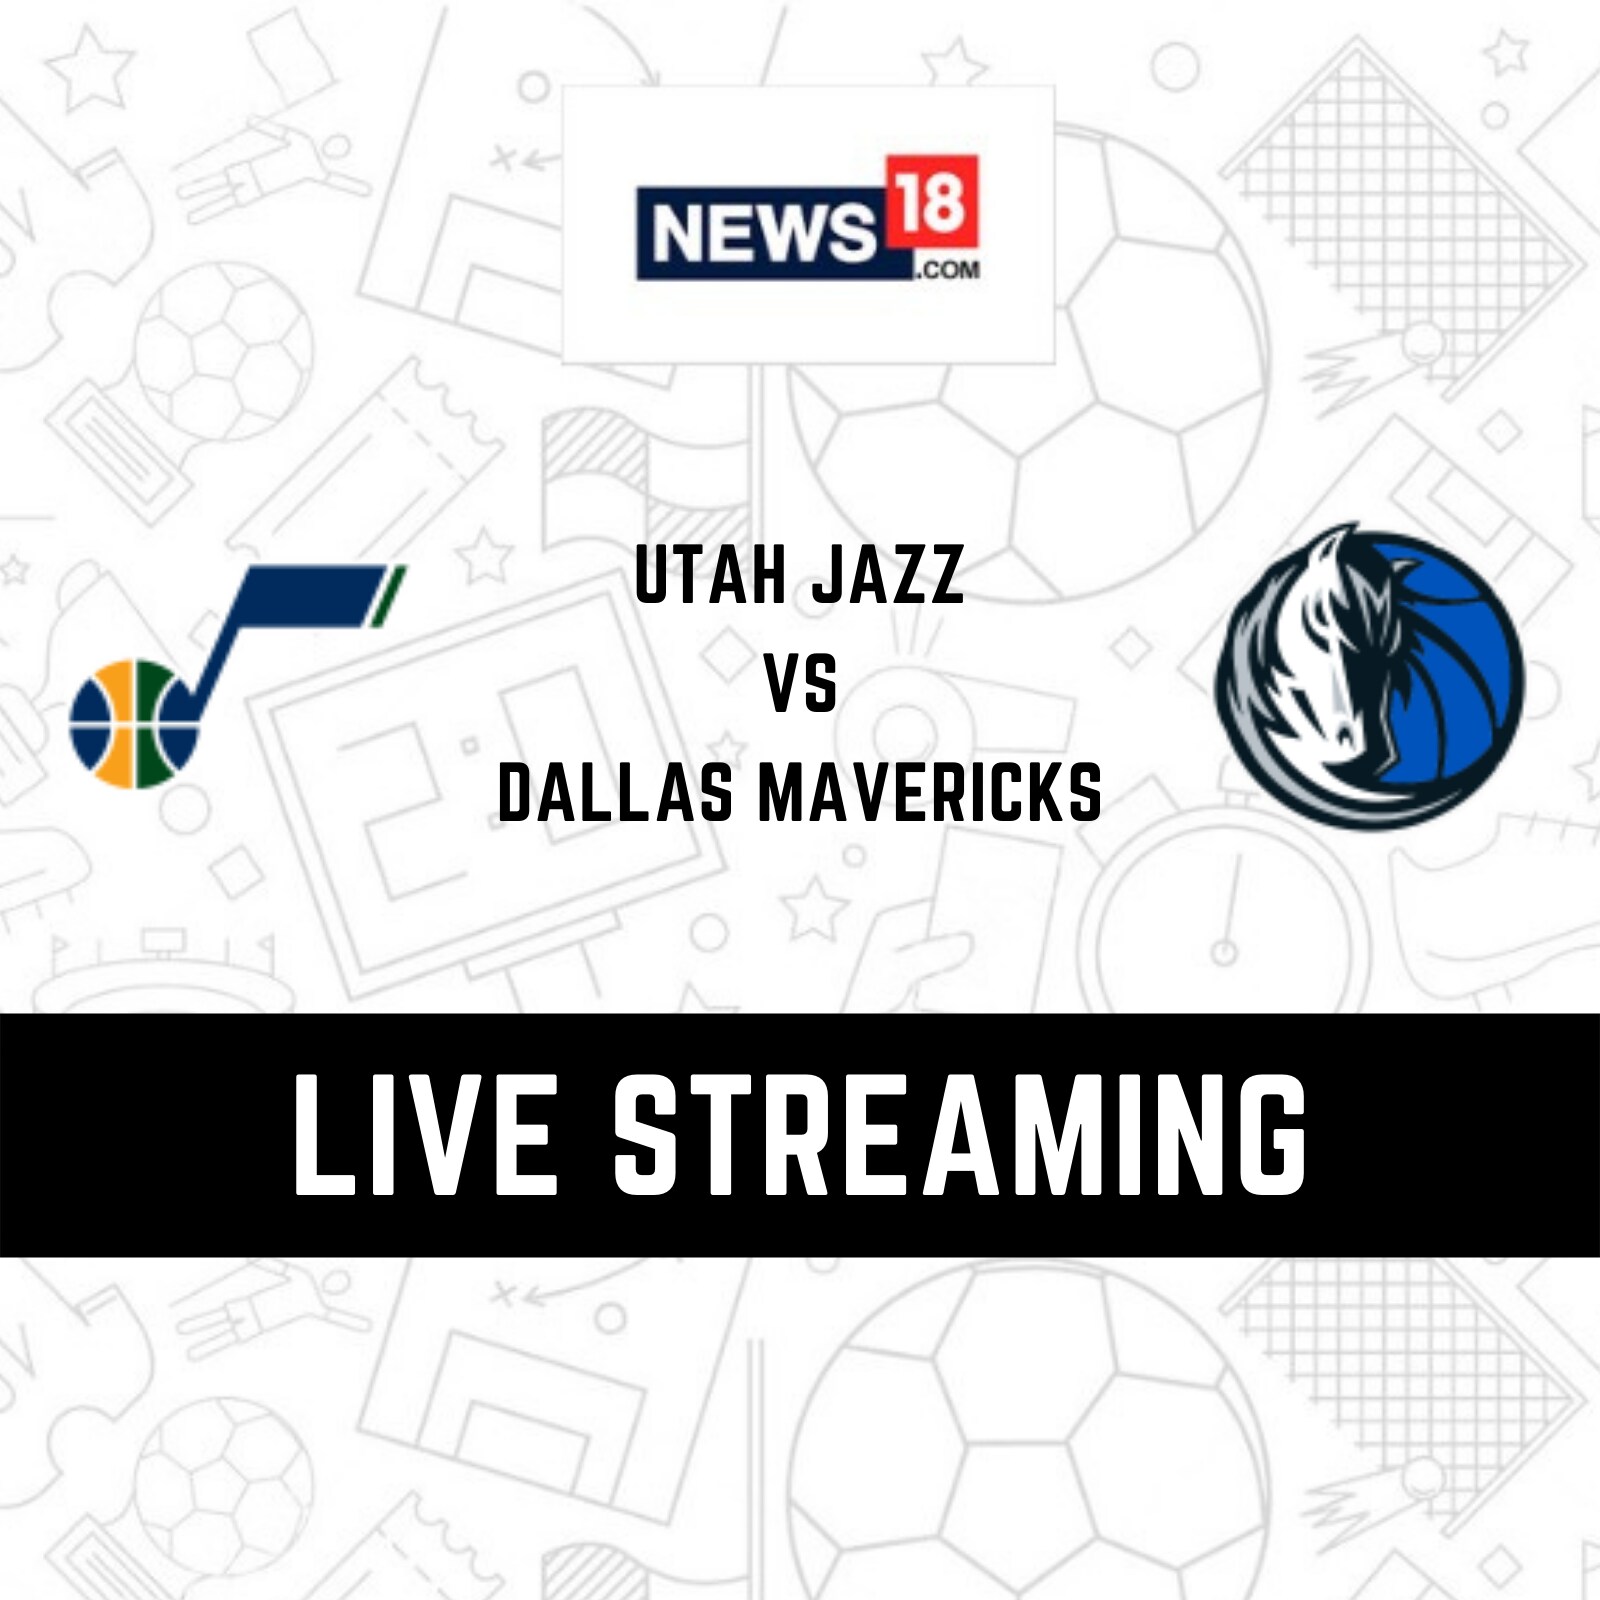 Utah Jazz vs Dallas Mavericks Live Streaming When and Where to Watch NBA 2022 playoffs Live Coverage on Live TV Online